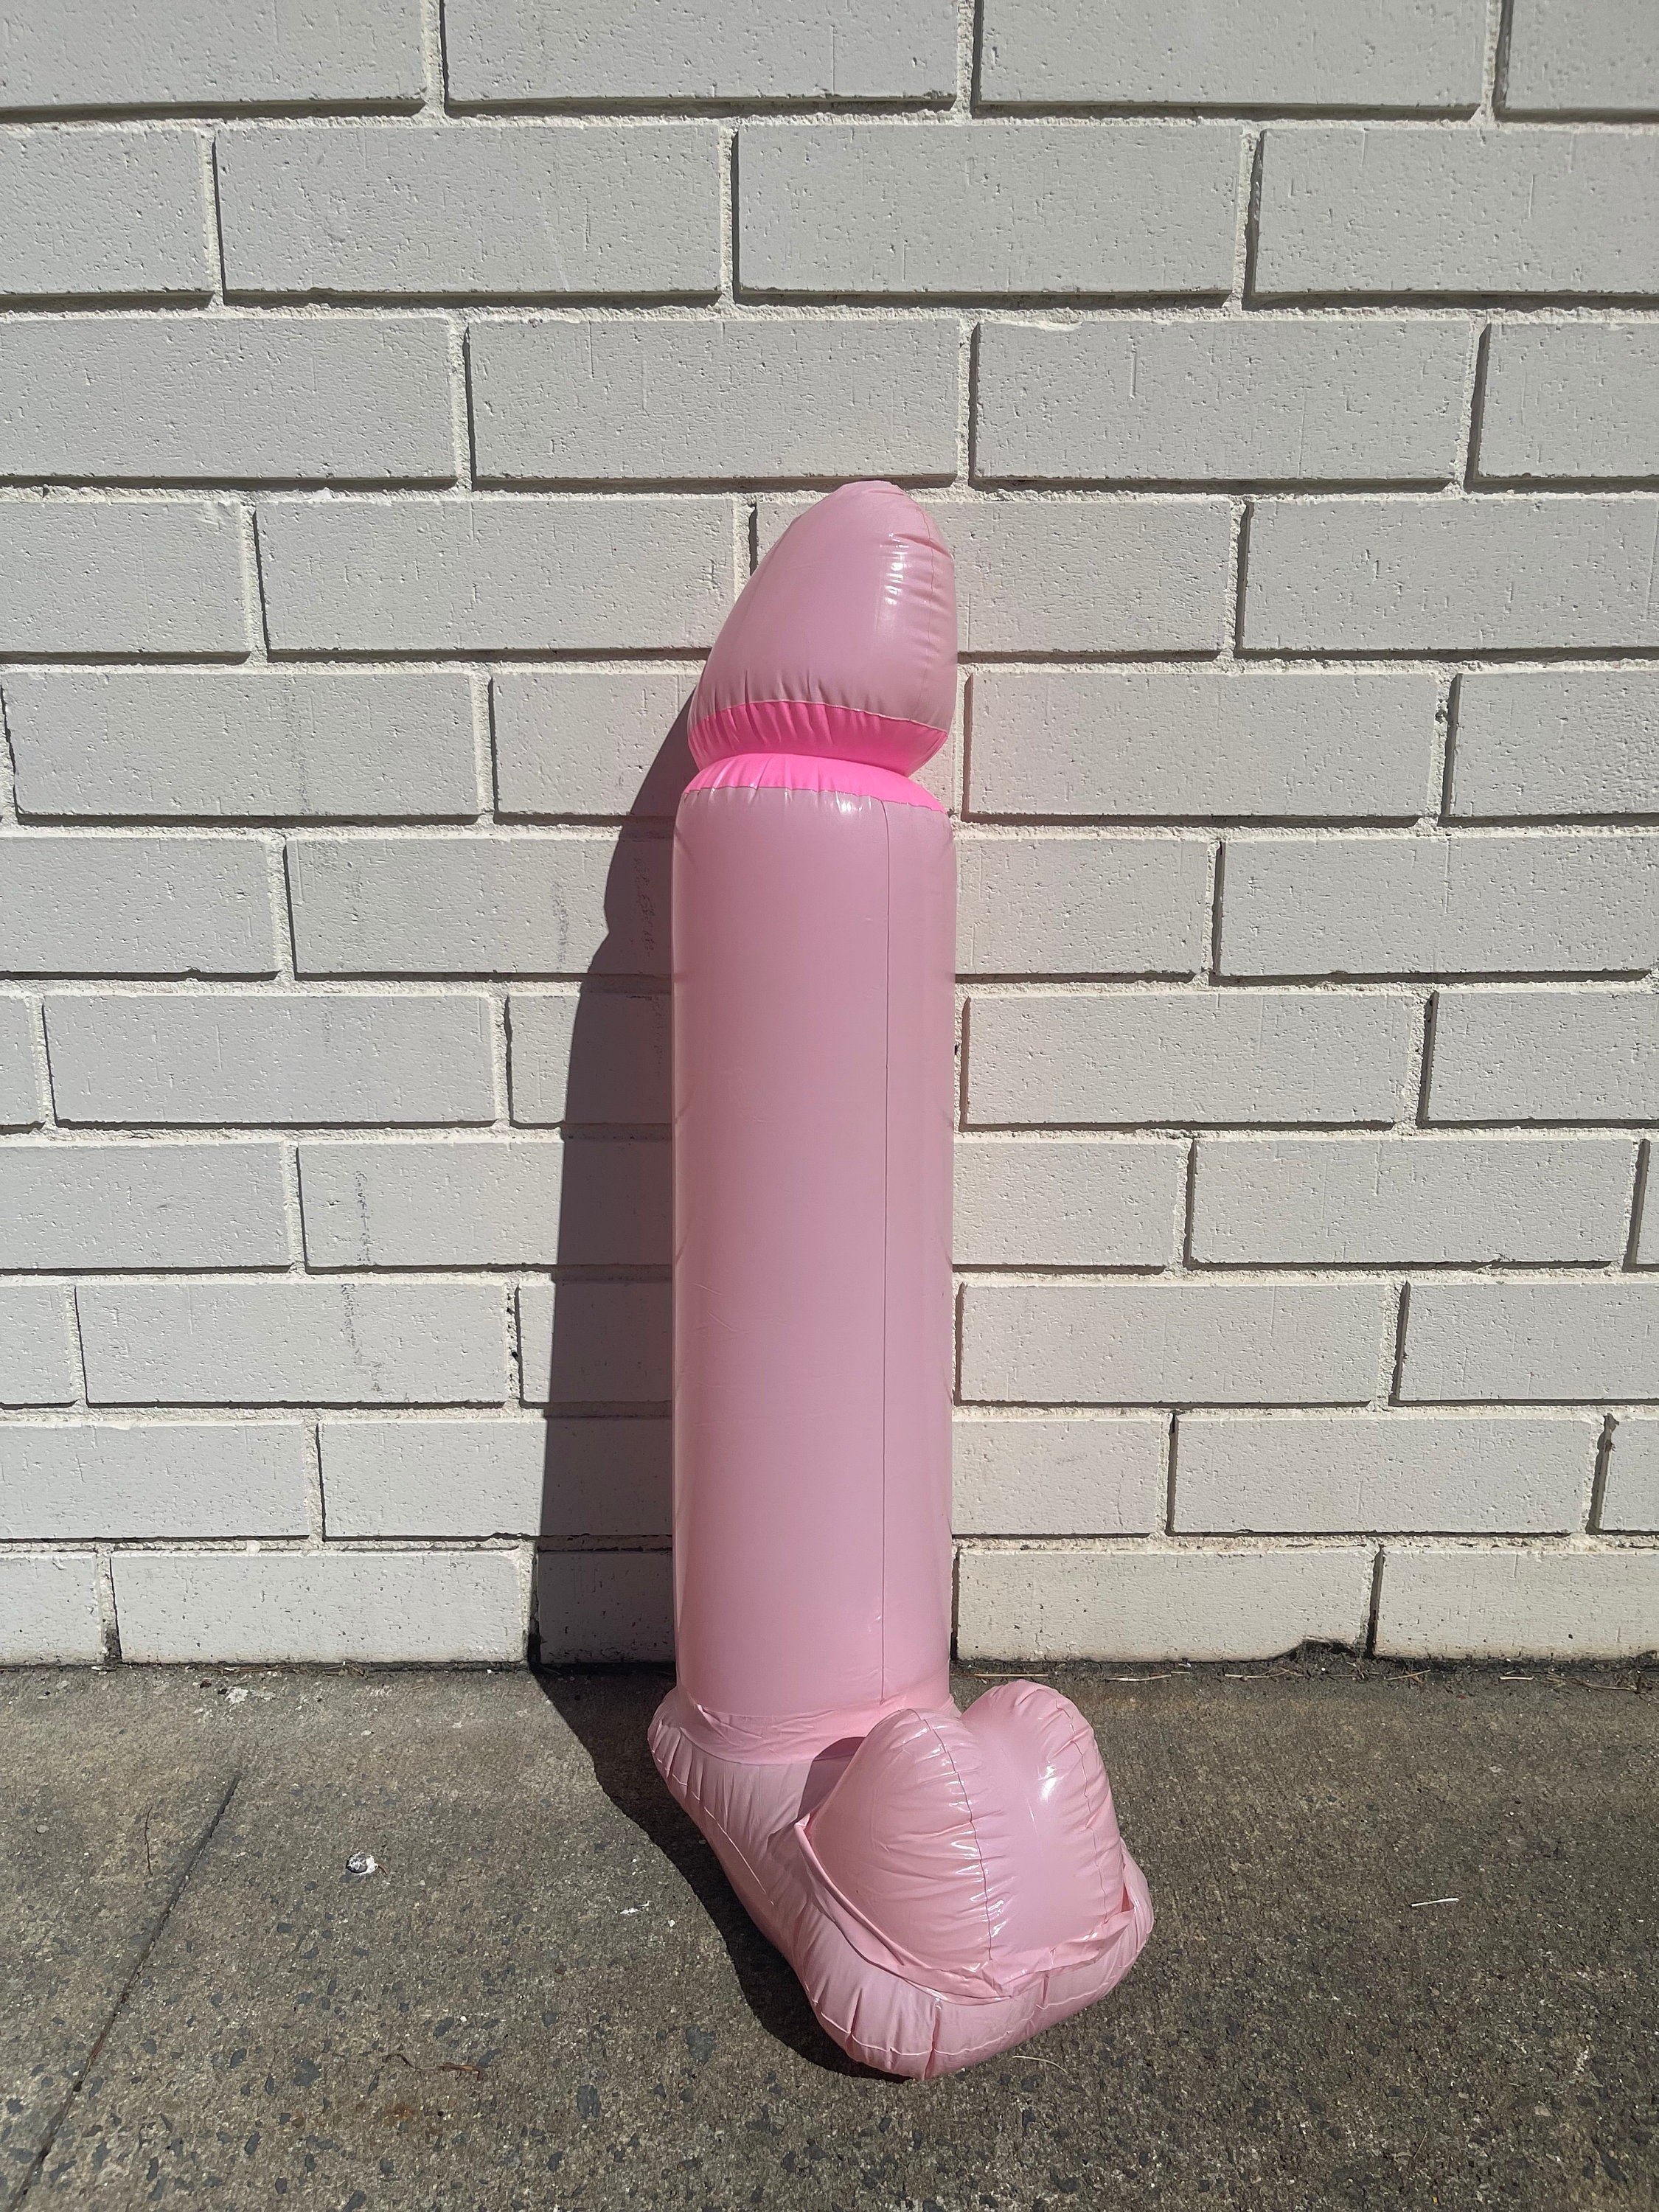 Bachelorette Party Blow Up Penis: Hilarious Bach Party Decor & Gag Gift